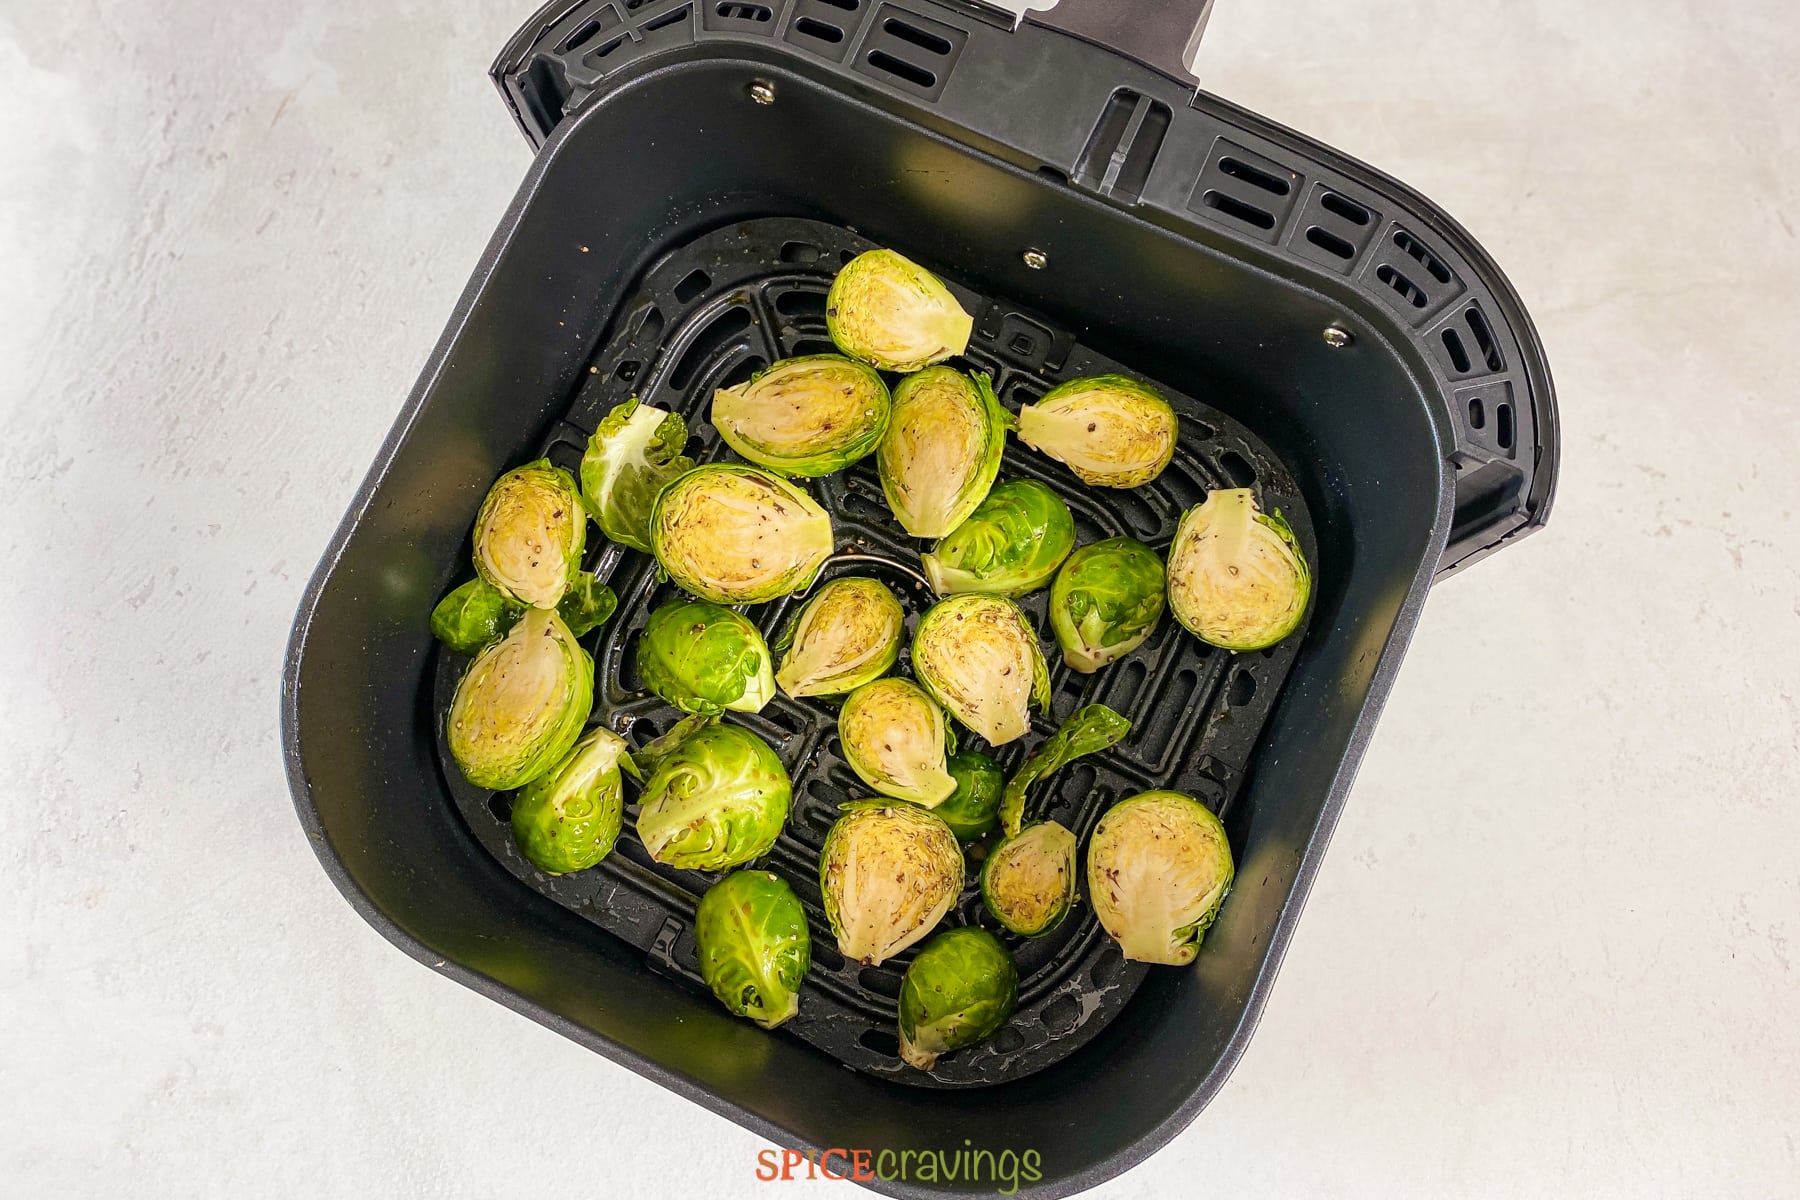 Seasoned brussel sprouts spread in air fryer basket, ready to cook